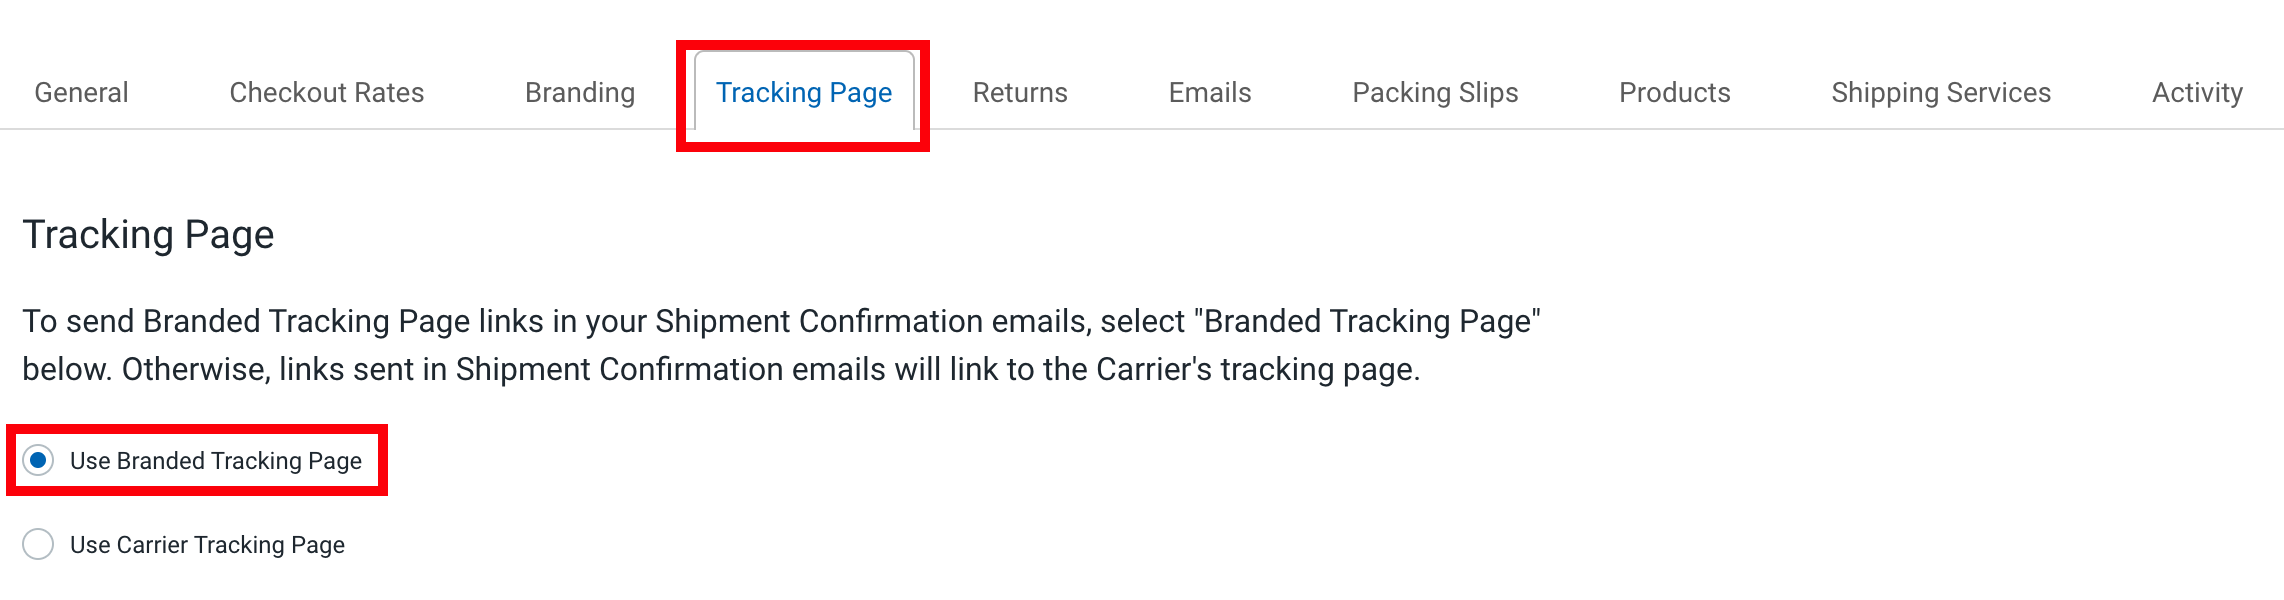 Tracking Page tab in the store settings. Use Branded Tracking Page option is outlined.